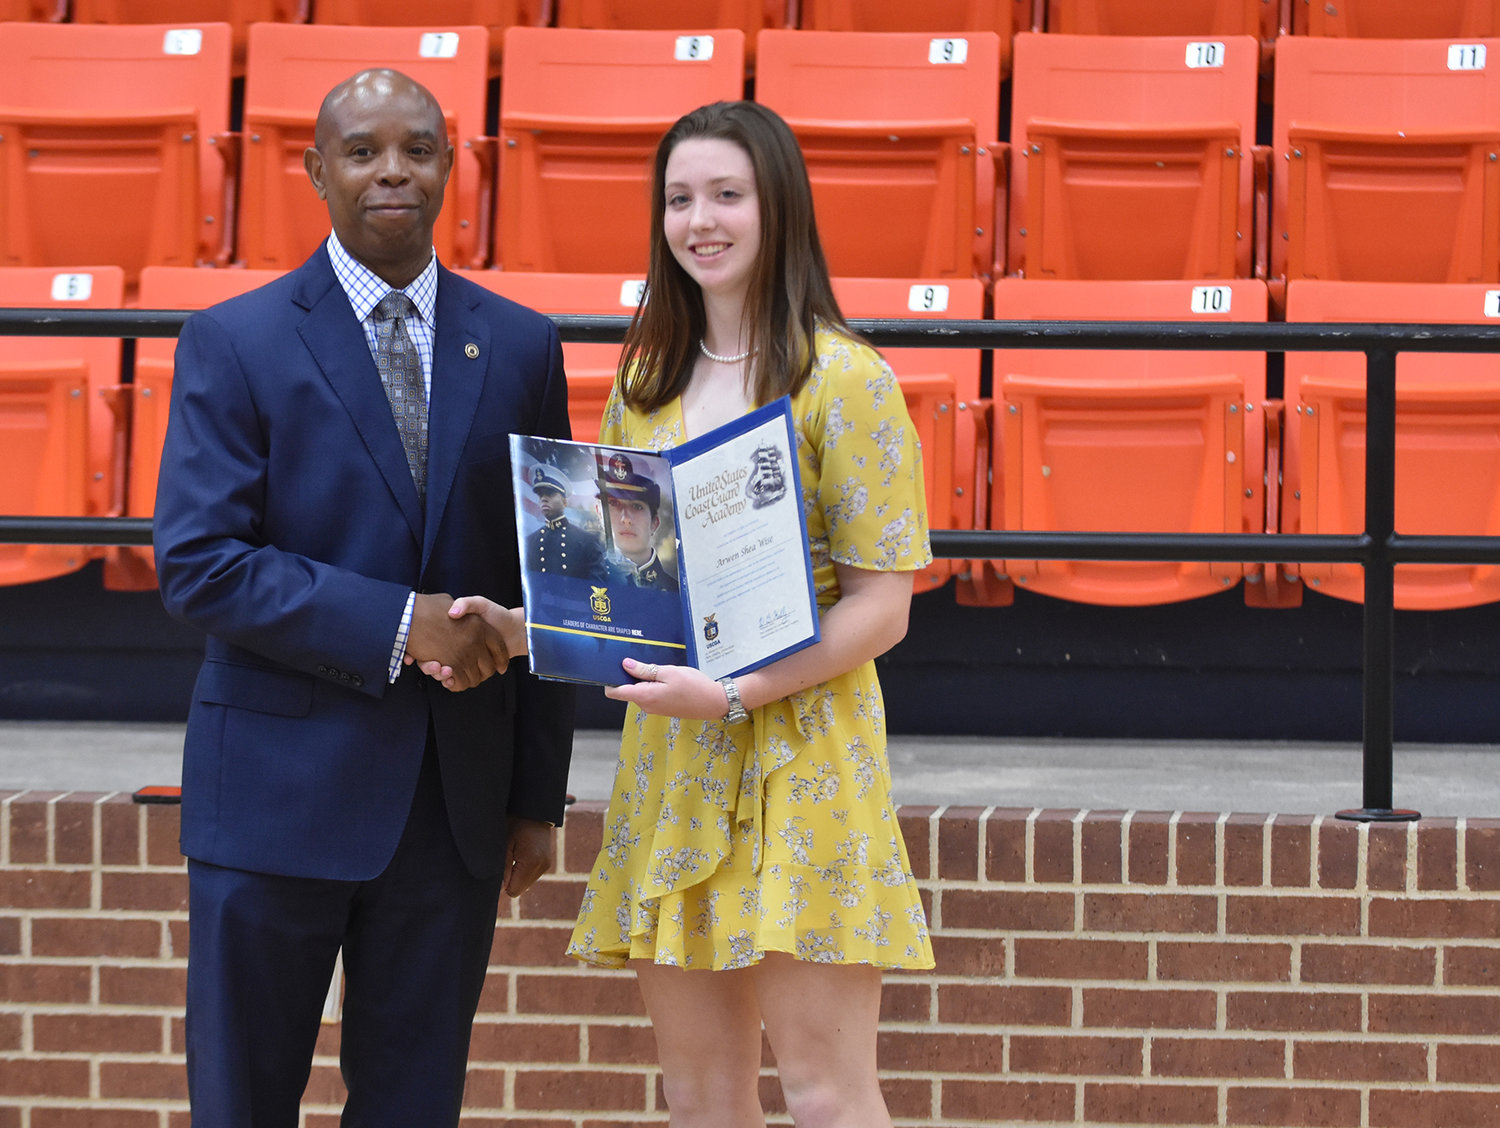 Dr. Cleveland Brown presented an appointment to the United States Coast Guard Academy to Arwen Wise at the May 9 Aledo High School Senior Awards.